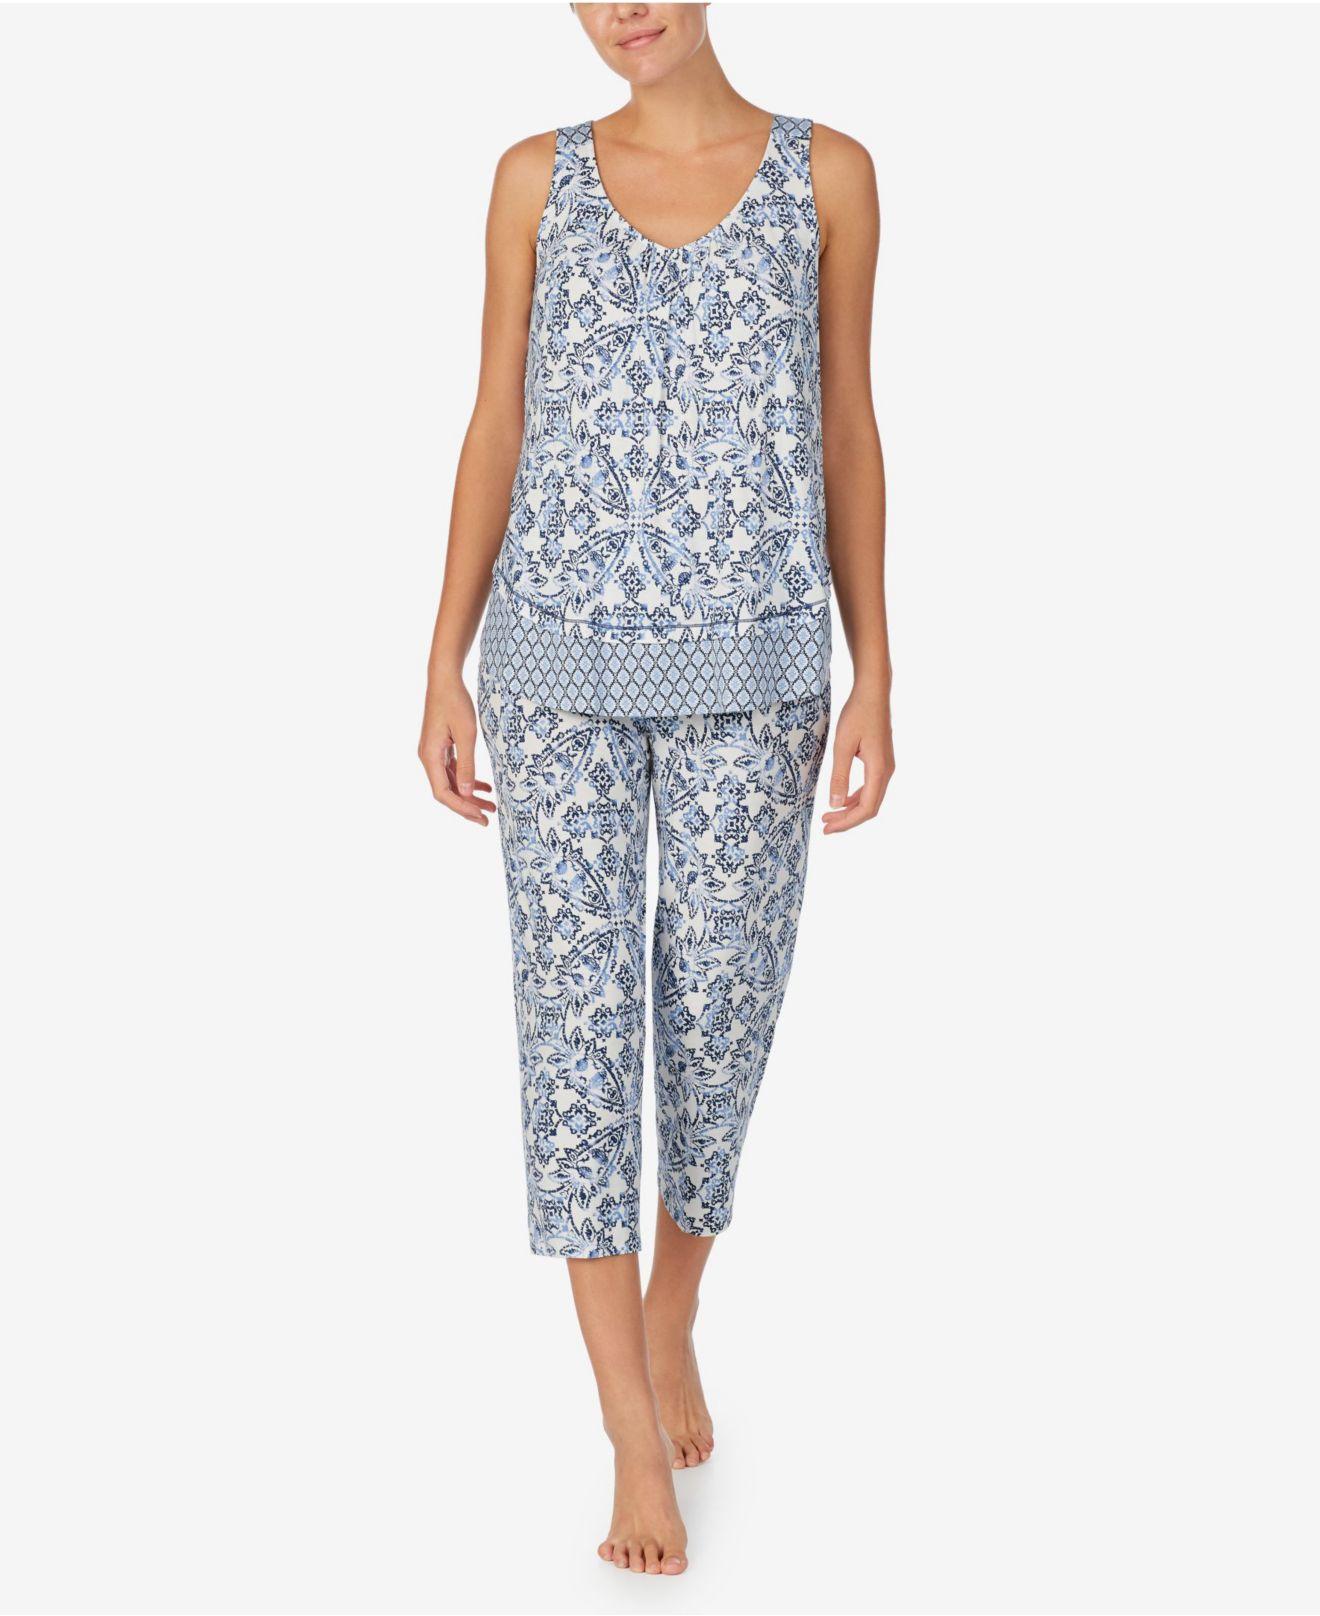 Ellen Tracy Synthetic Cropped Pajama Set in Blue - Lyst